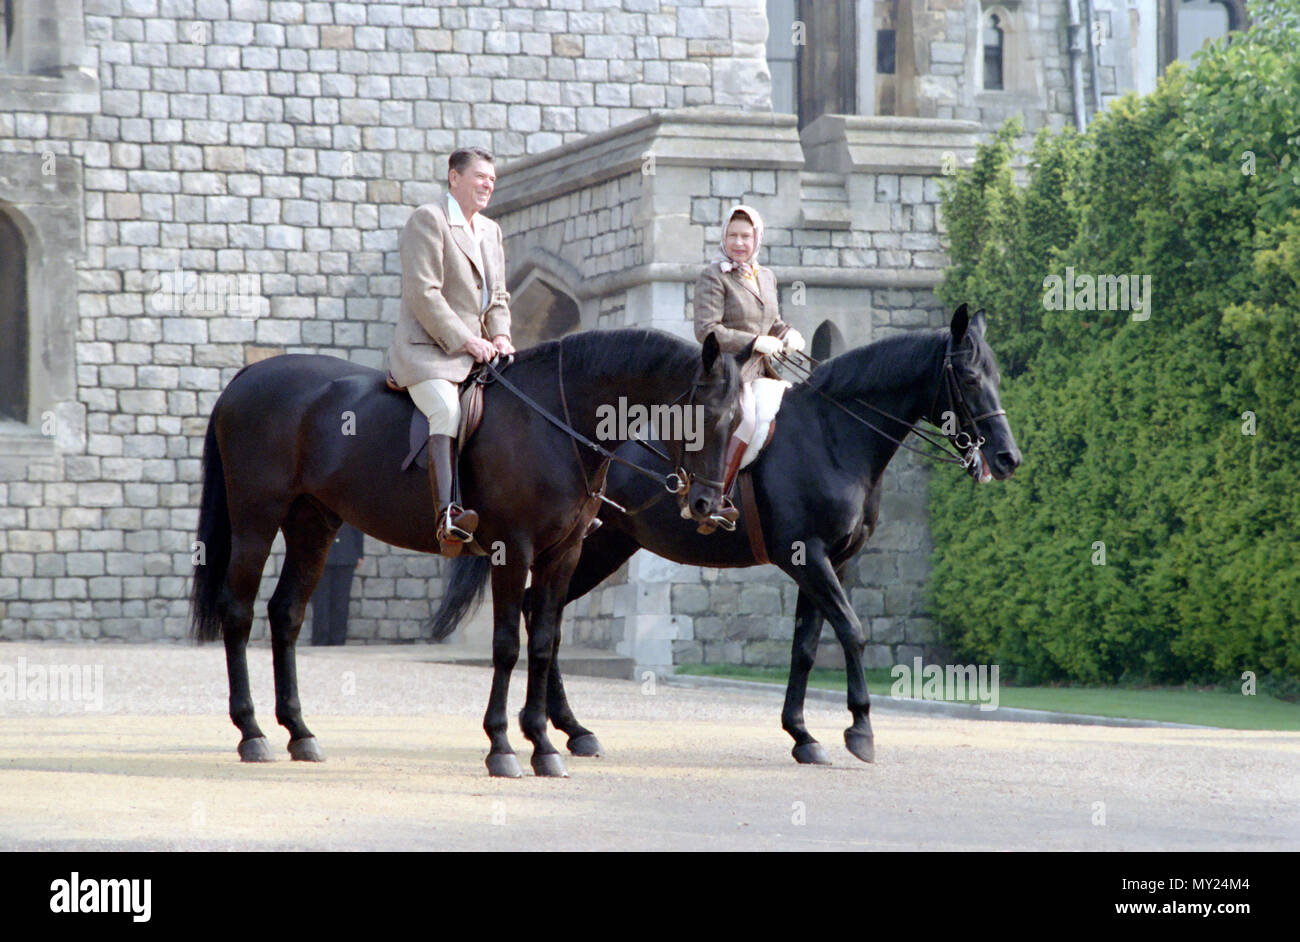 6/8/1982 President Reagan and Queen Elizabeth II horseback riding at Windsor Castle in England Stock Photo